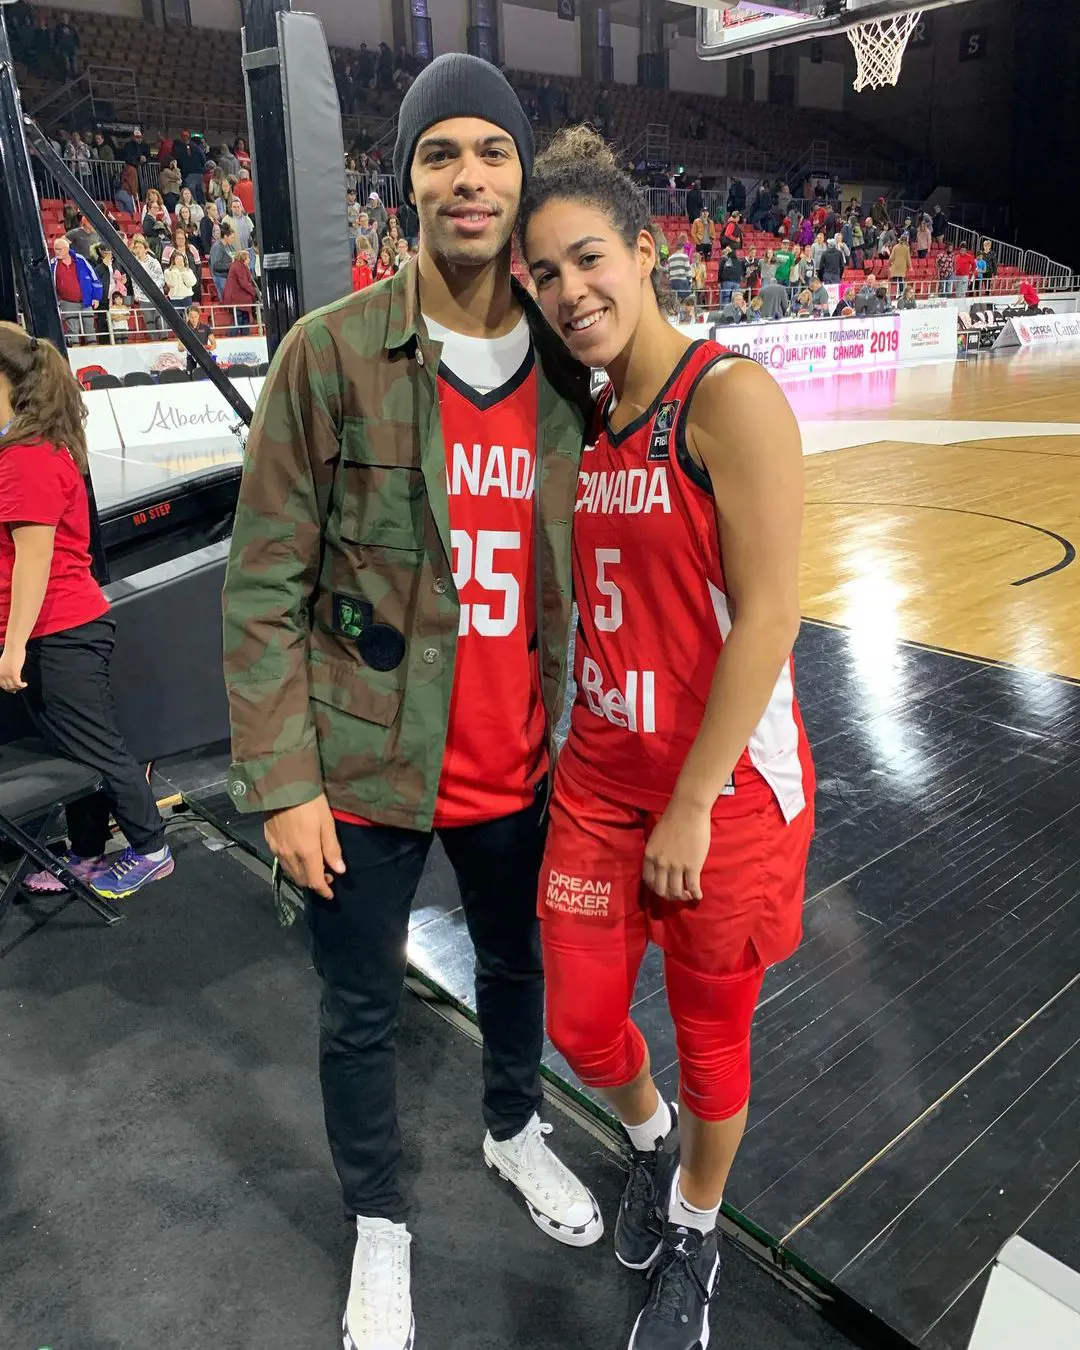 Darnell posted a picture with his sibling Kia Nurse (on his left)